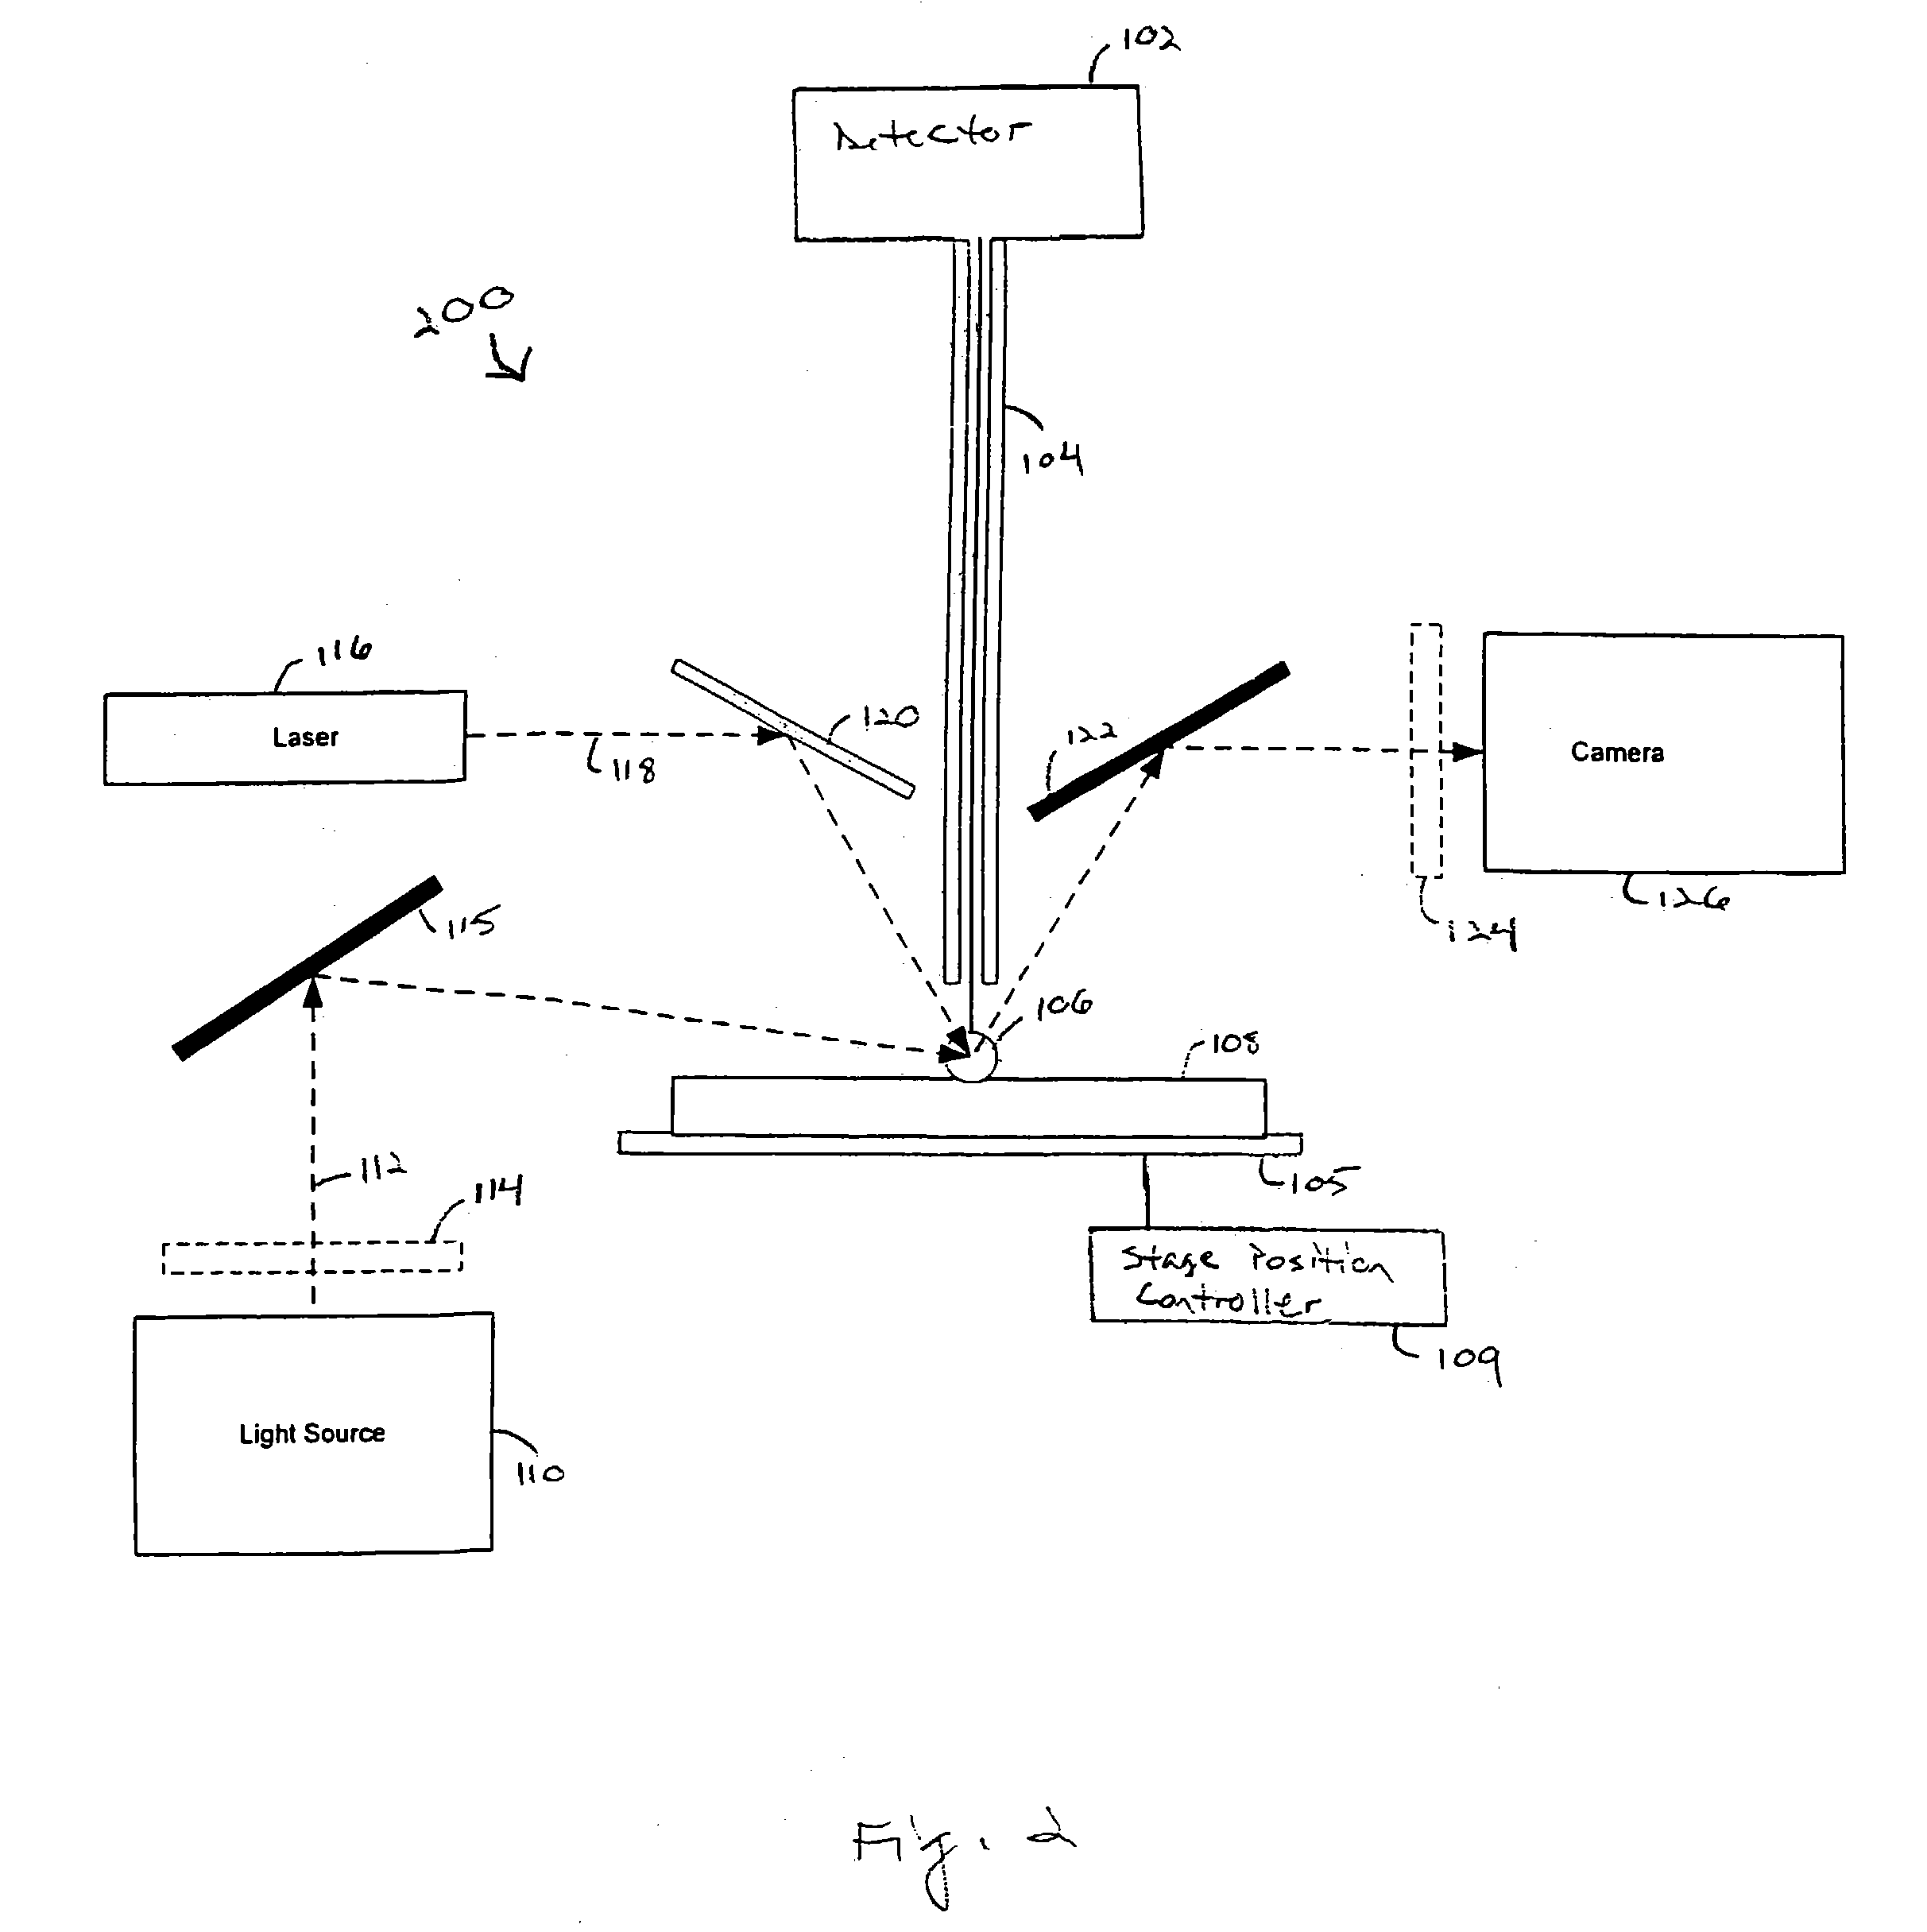 Apparatus and method for MALDI source control with external image capture